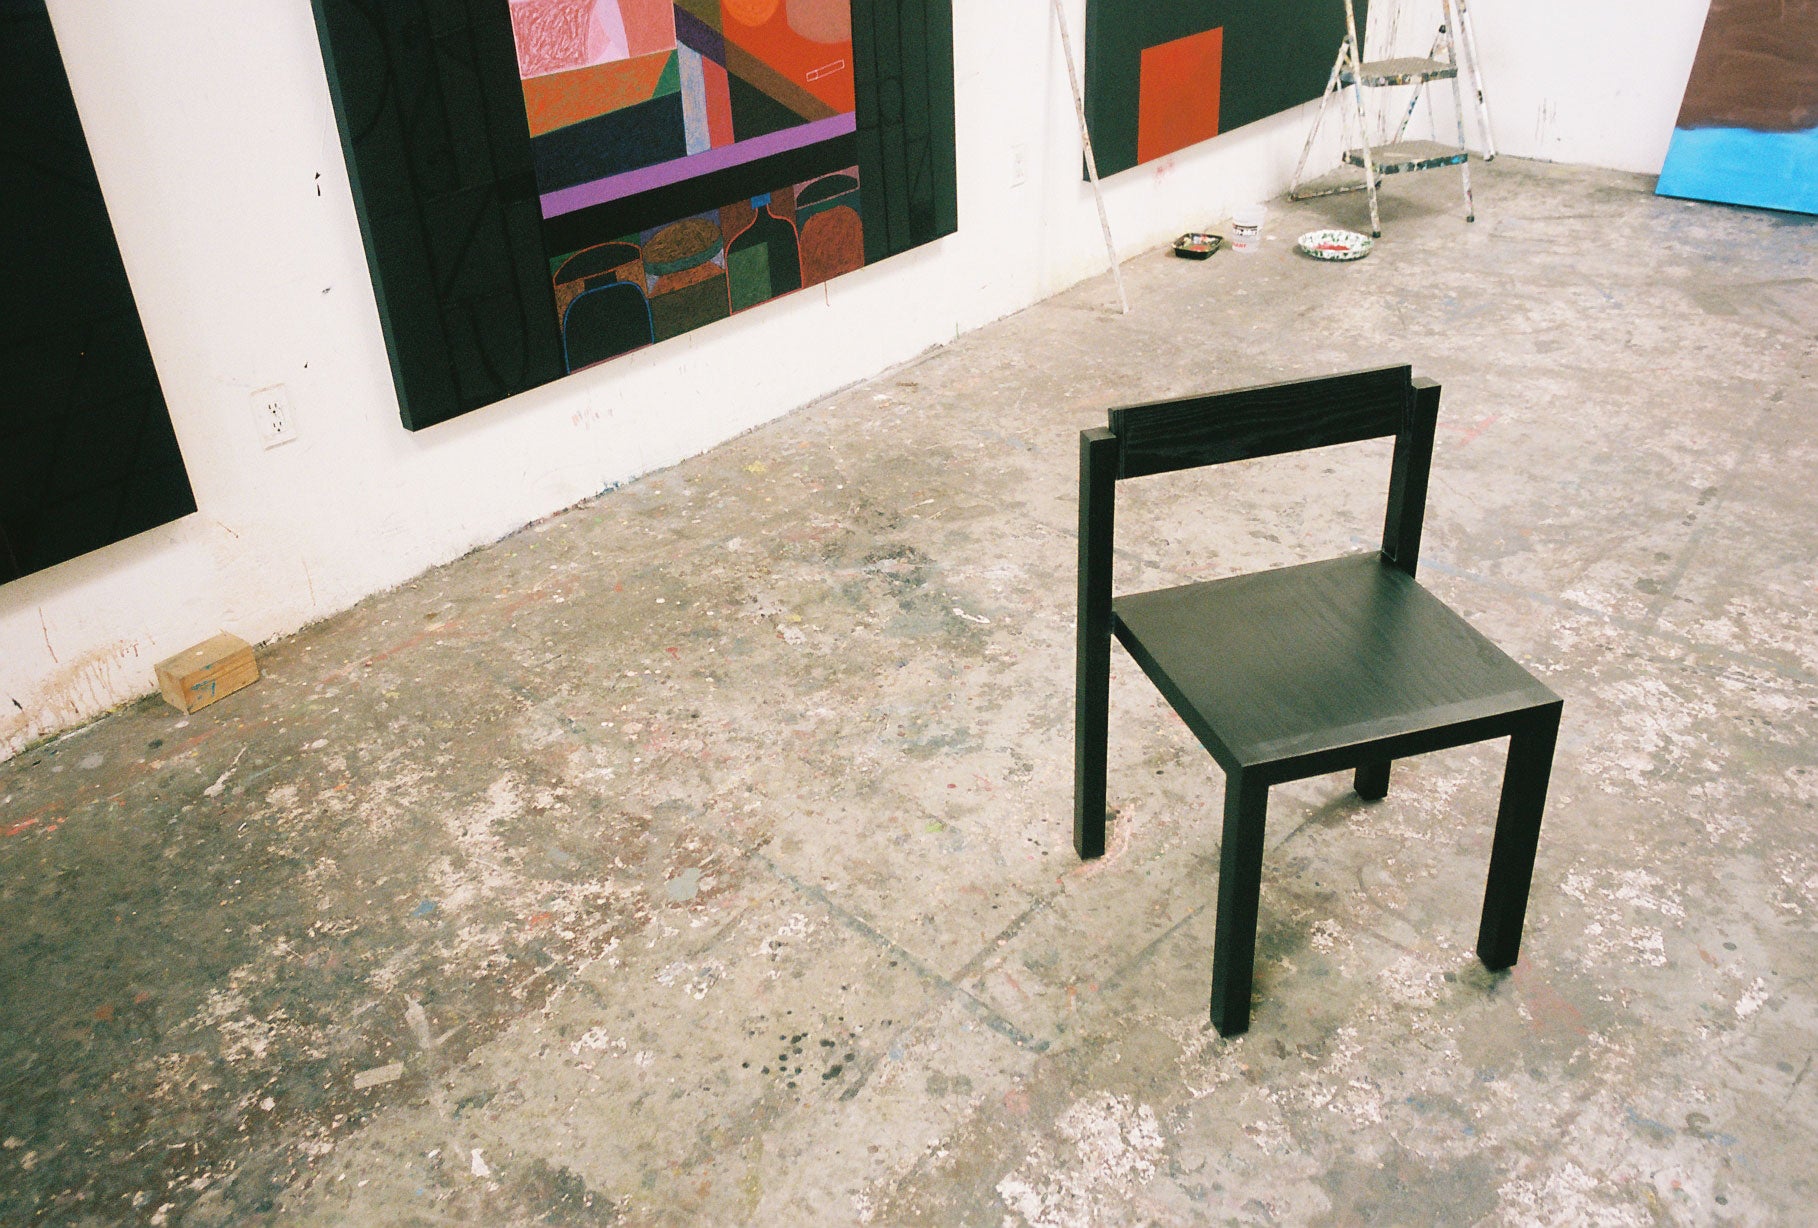 Black anything chair shot in the gallery